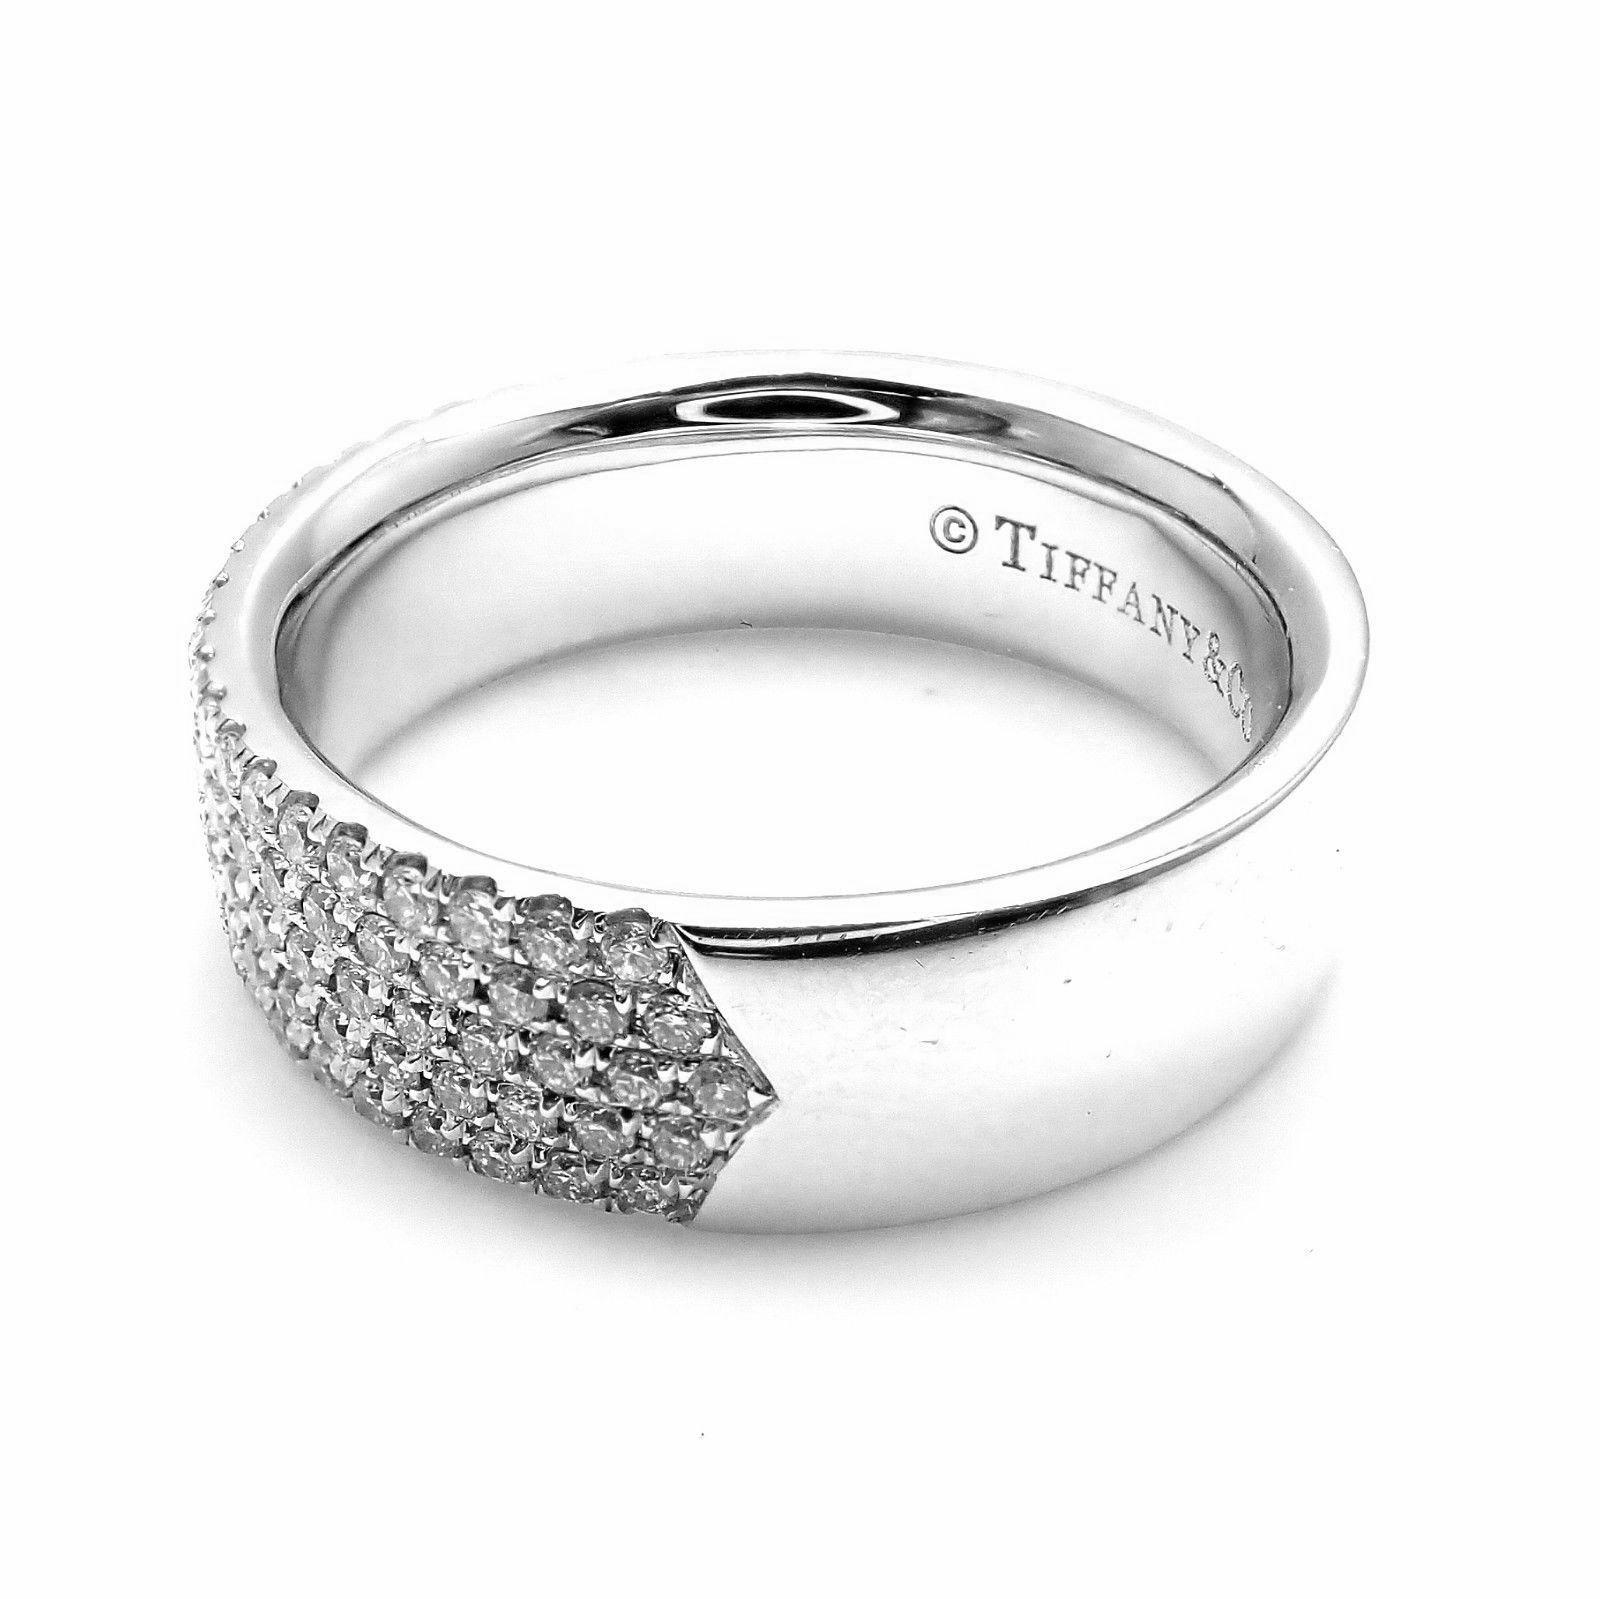 18k White Gold Diamond Metro Five Row Band Ring by Tiffany & Co.
With Round brilliant cut diamonds VVS1 clarity, E color total weight approx. .96ct
Measurements: 
Ring Size: 8
Weight: 10 grams
Band Width: 7mm
Stamped Hallmarks: Tiffany&Co 750